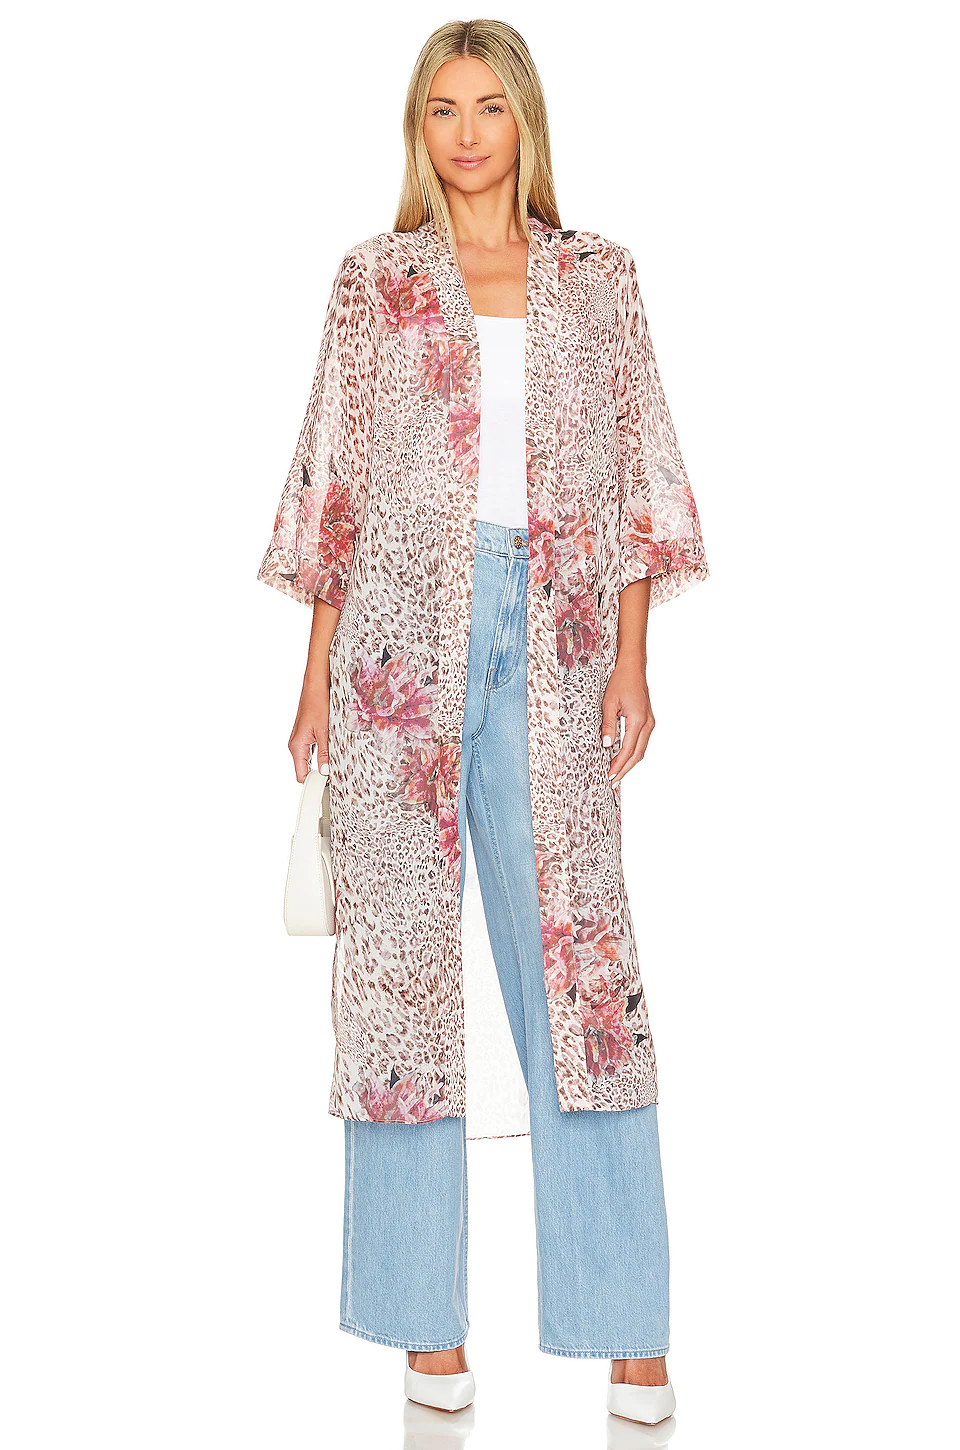 Kimono Outfit with Wide Leg Jeans